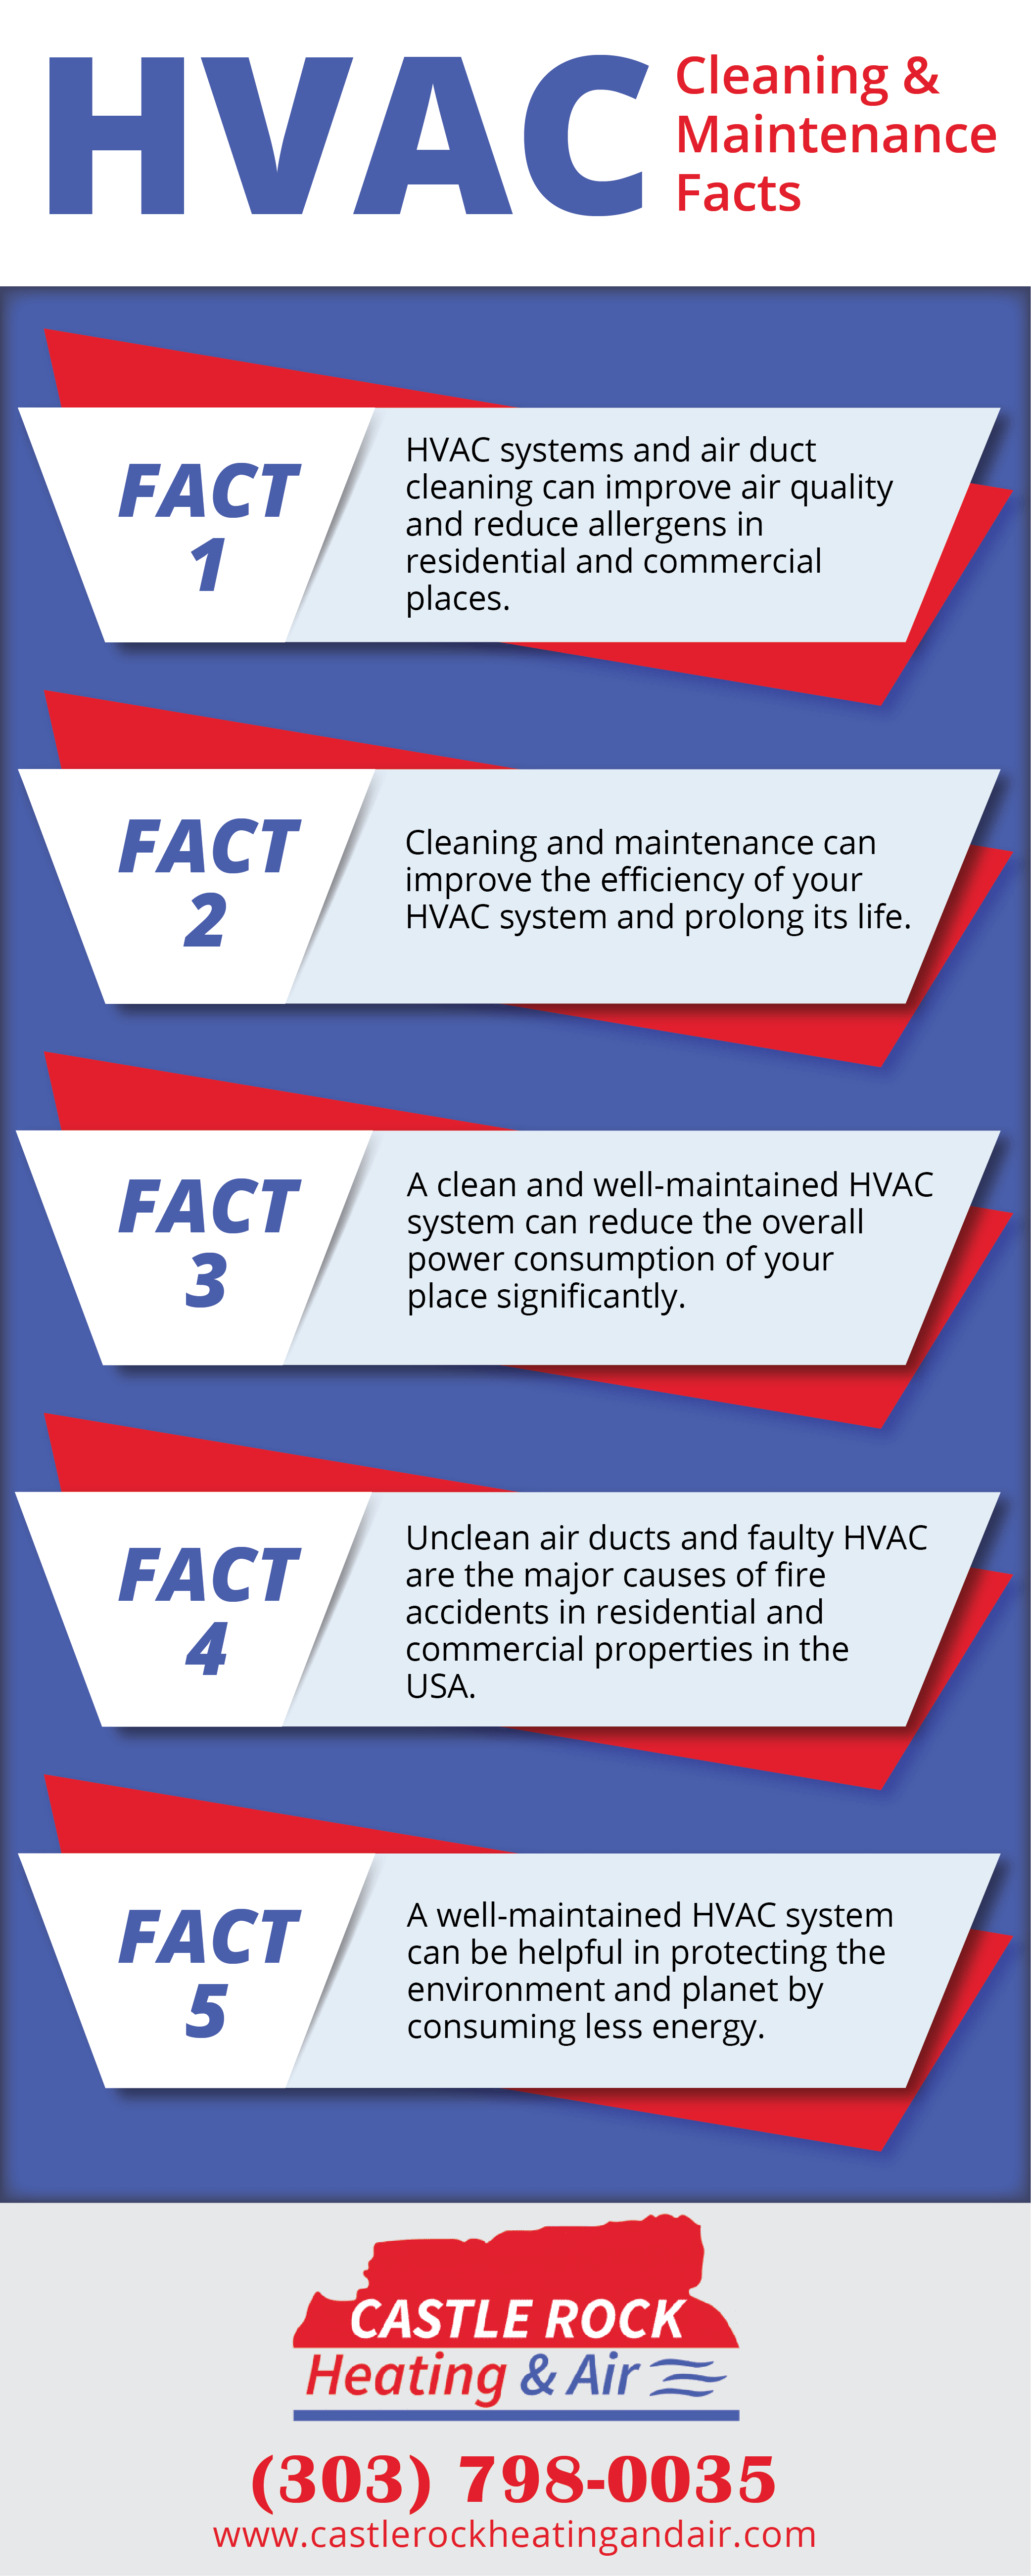 HVAC Cleaning & Maintenance Facts